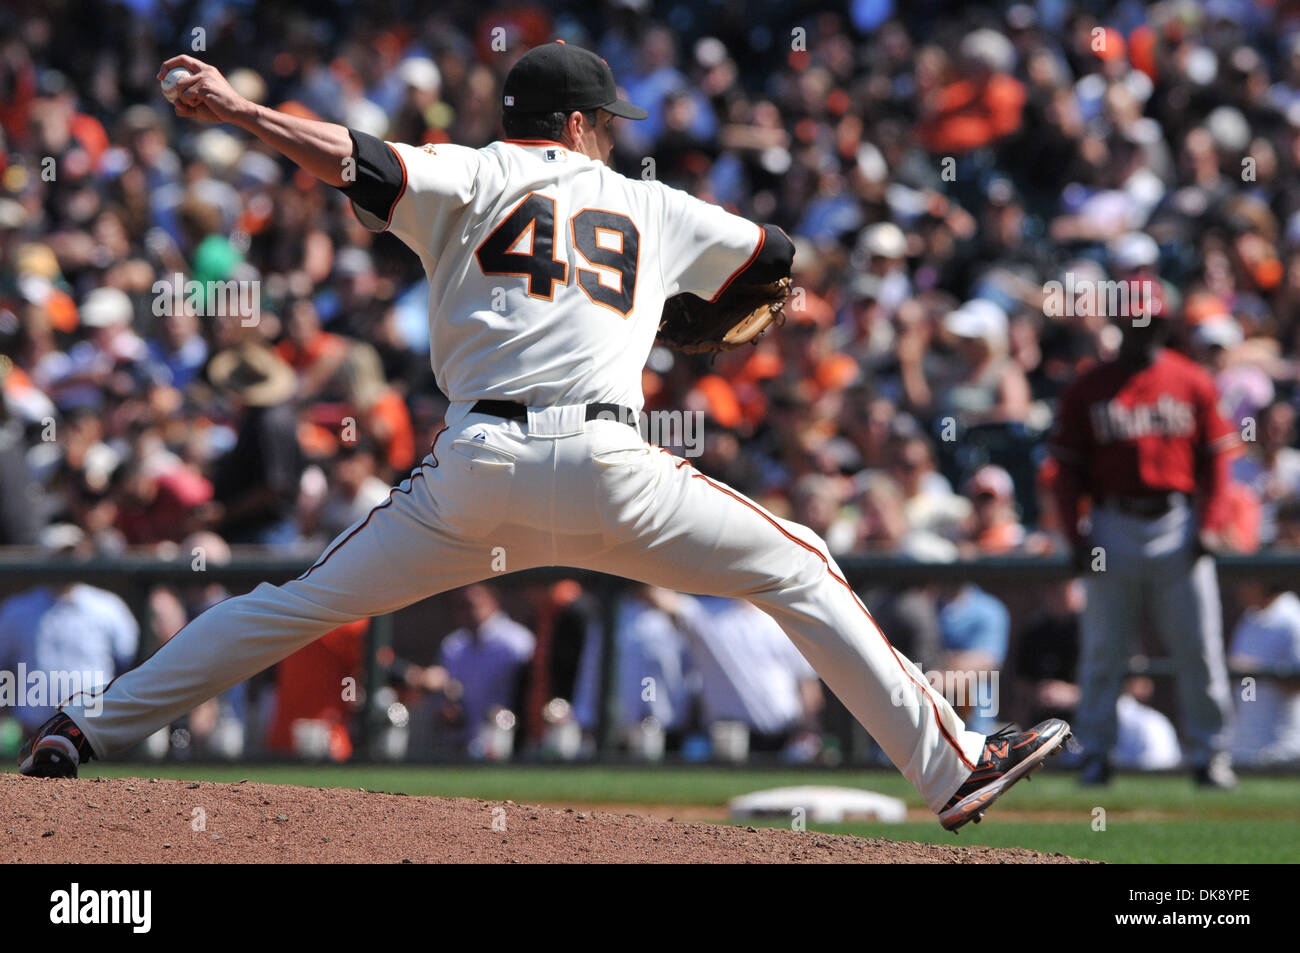 Aug. 3, 2011 - San Francisco, California, U.S. - San Francisco Giants relief pitcher JAVIER LOPEZ (49) pitches during Wednesday's game at At&t park.  The Giants beat the Diamondbacks 8-1. (Credit Image: © Scott Beley/Southcreek Global/ZUMAPRESS.com) Stock Photo